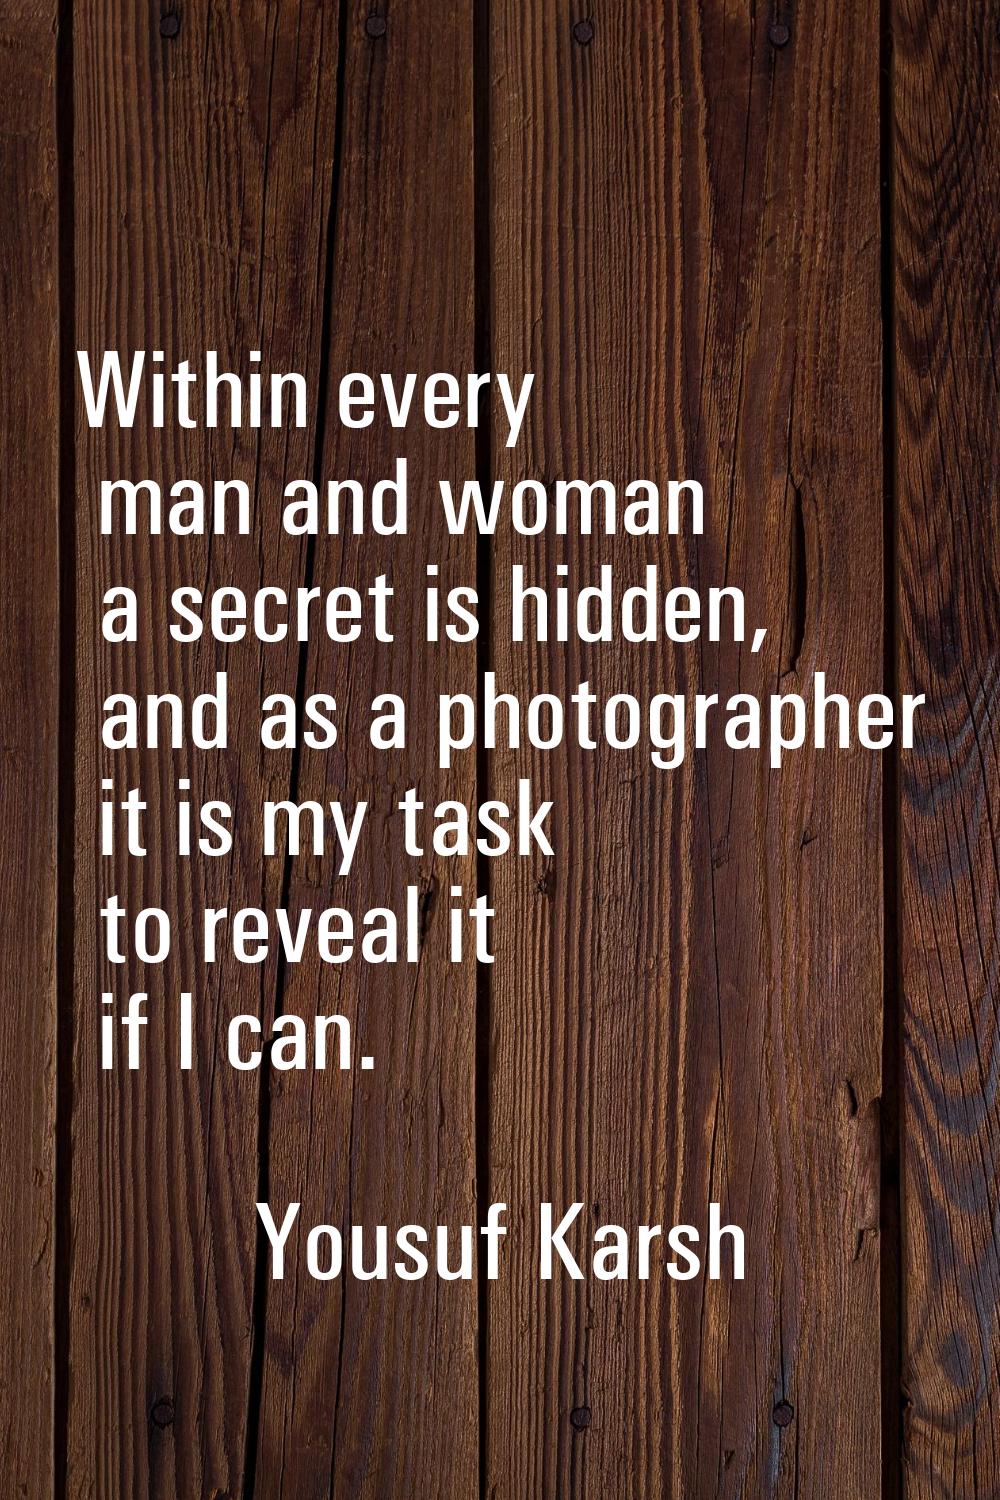 Within every man and woman a secret is hidden, and as a photographer it is my task to reveal it if 